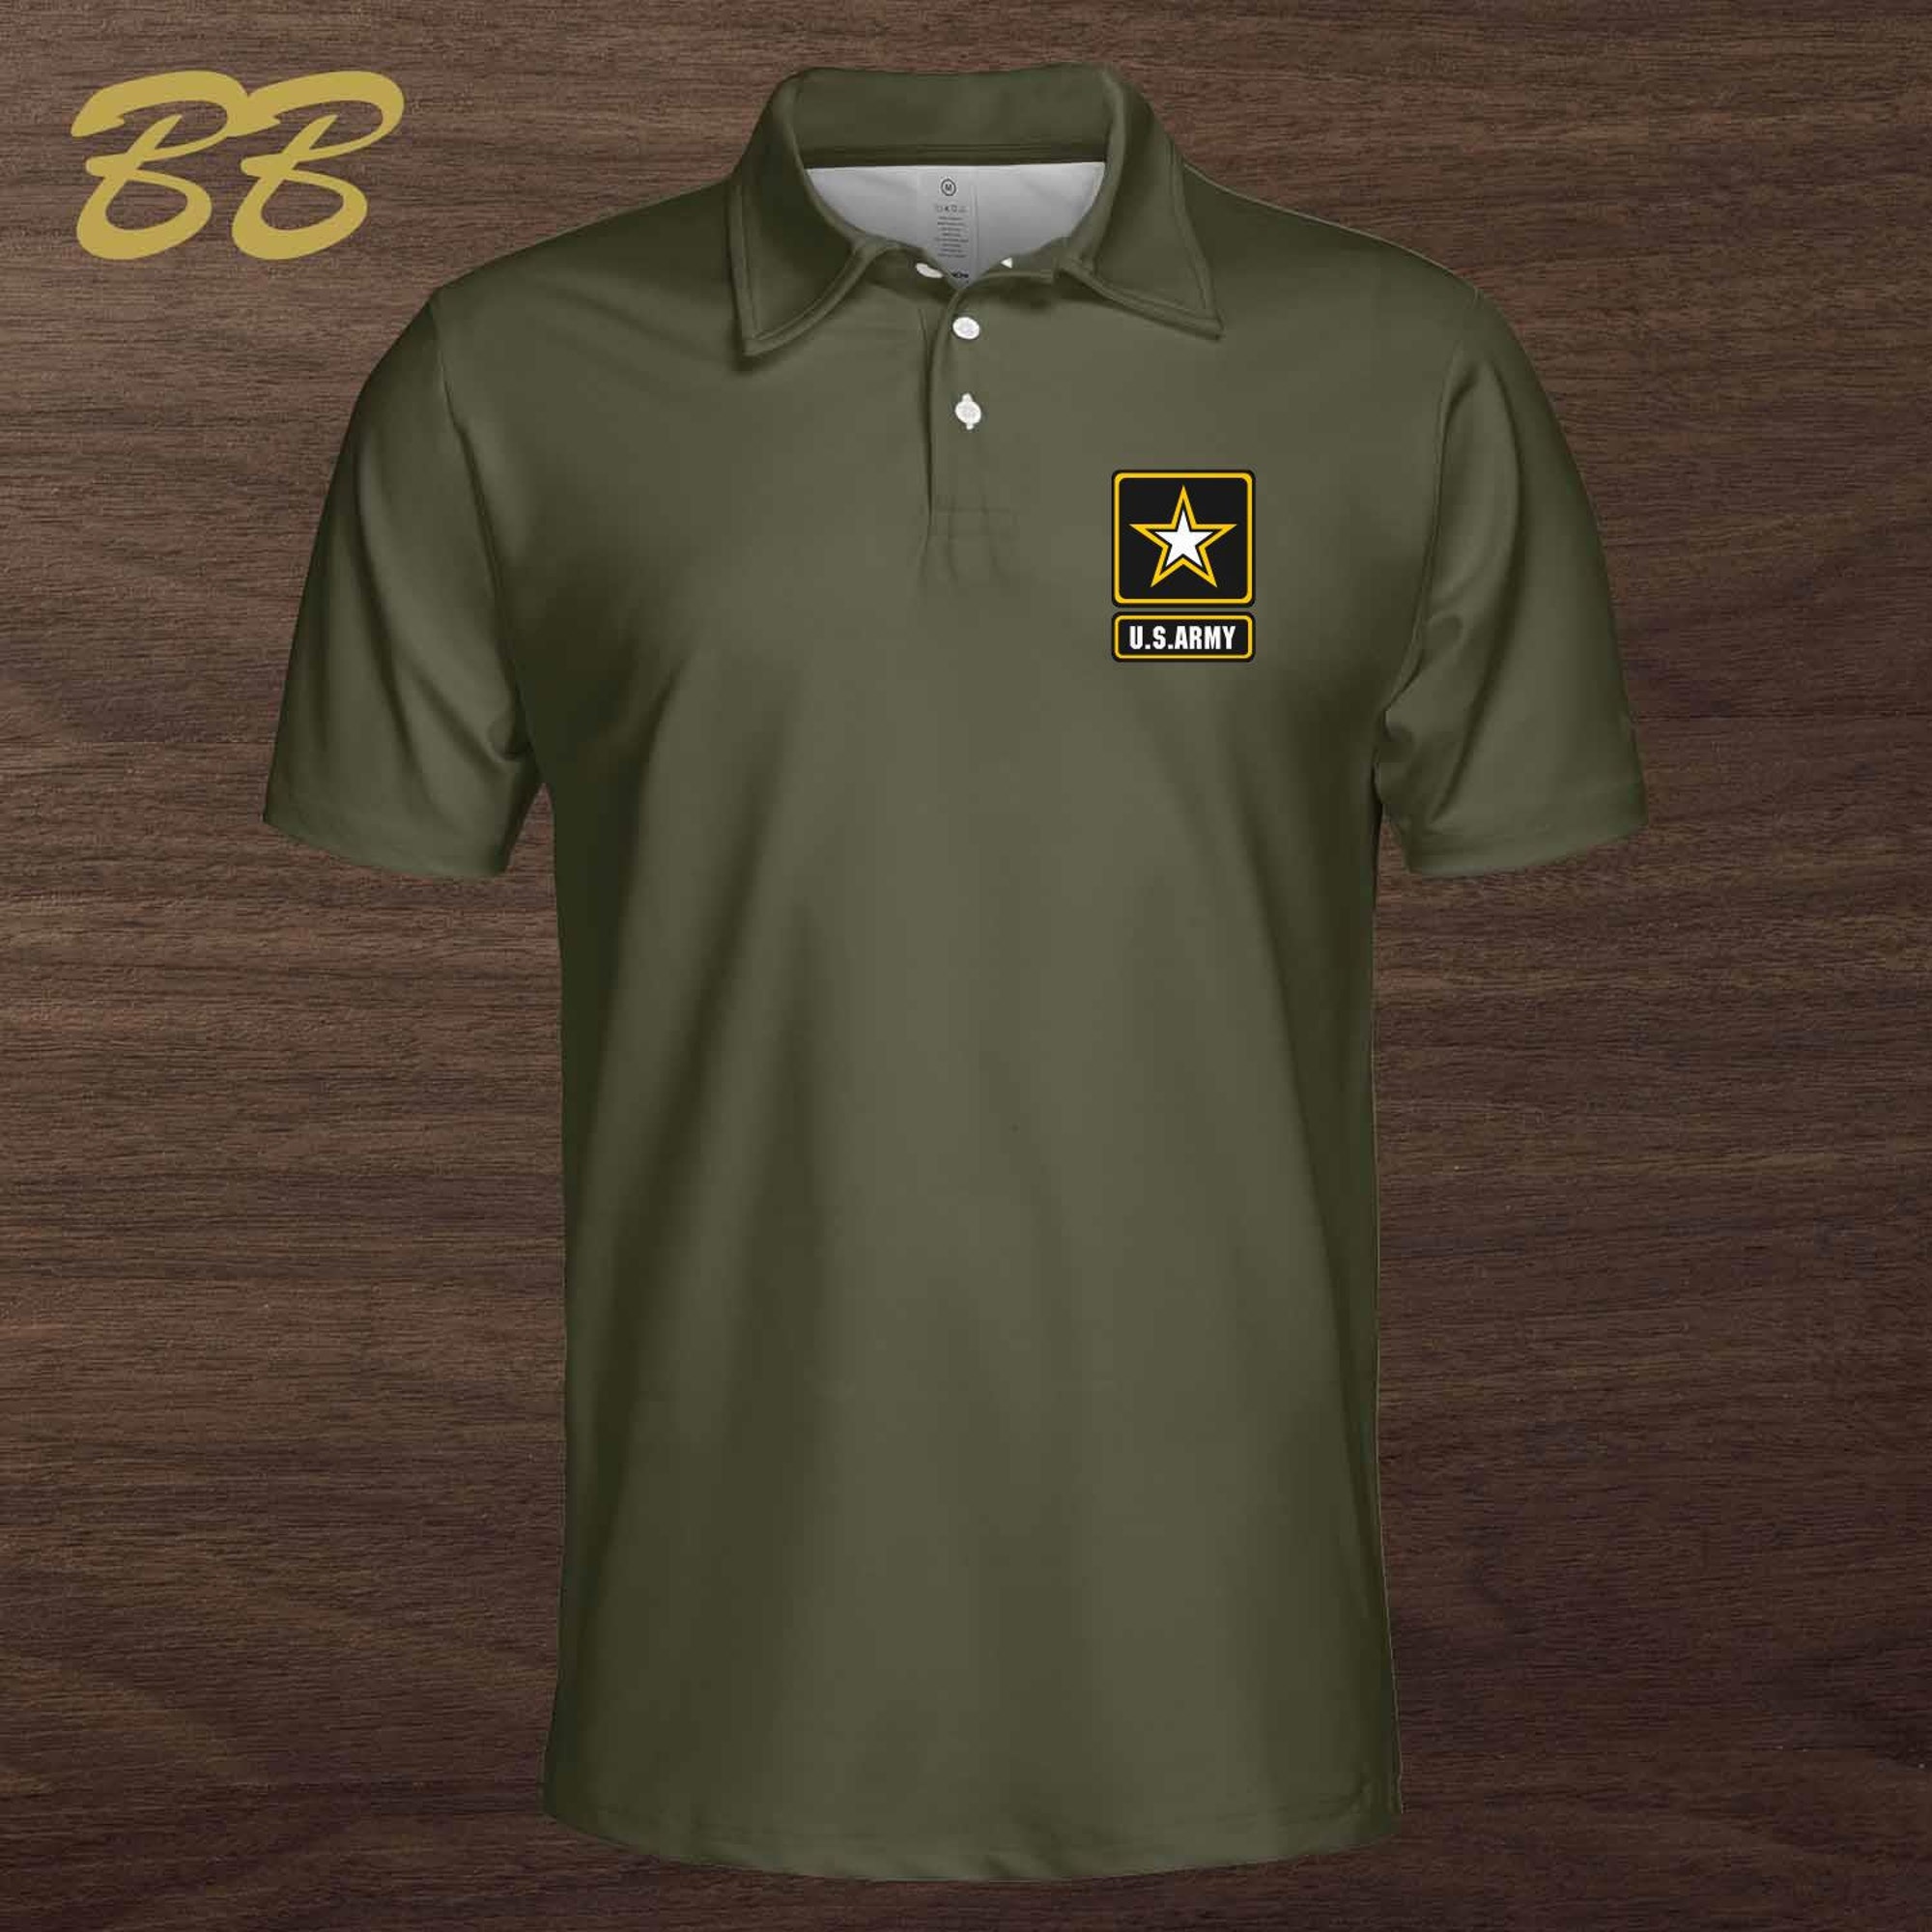 Discover US Army Polo Shirt, US Army Shirt 31